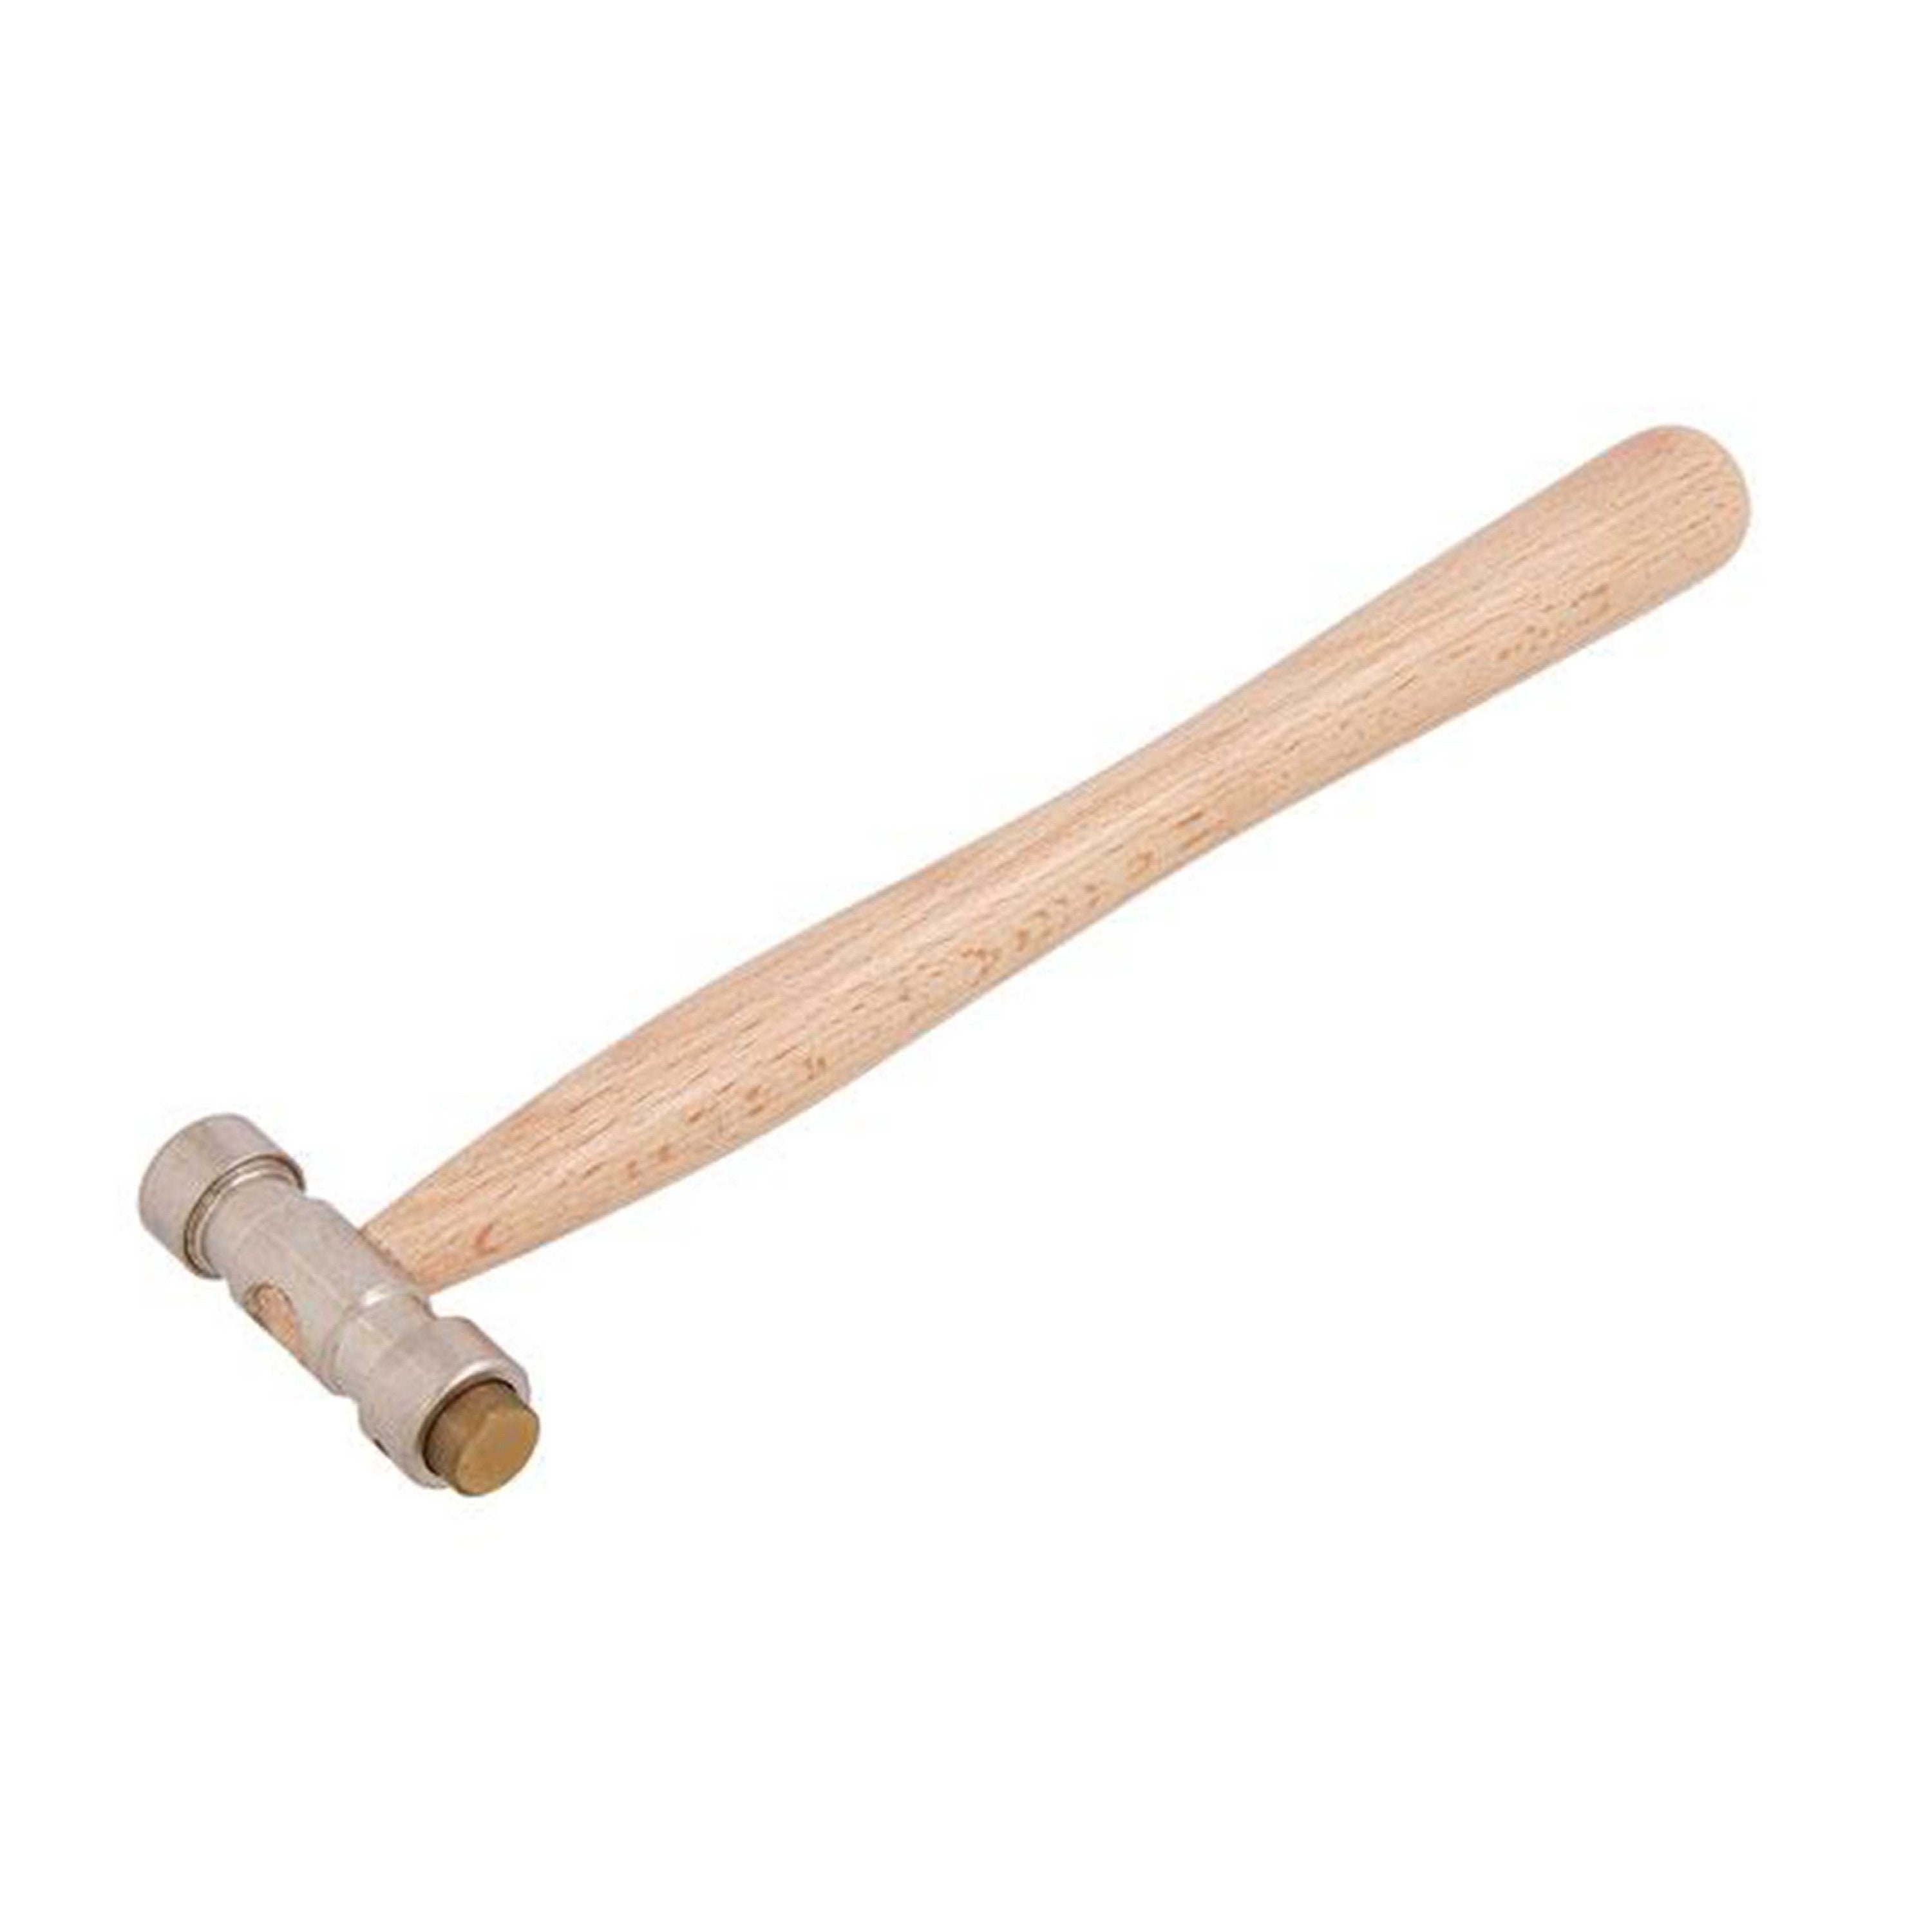 Brass and Nylon Hammer With Detachable Face 37-395 